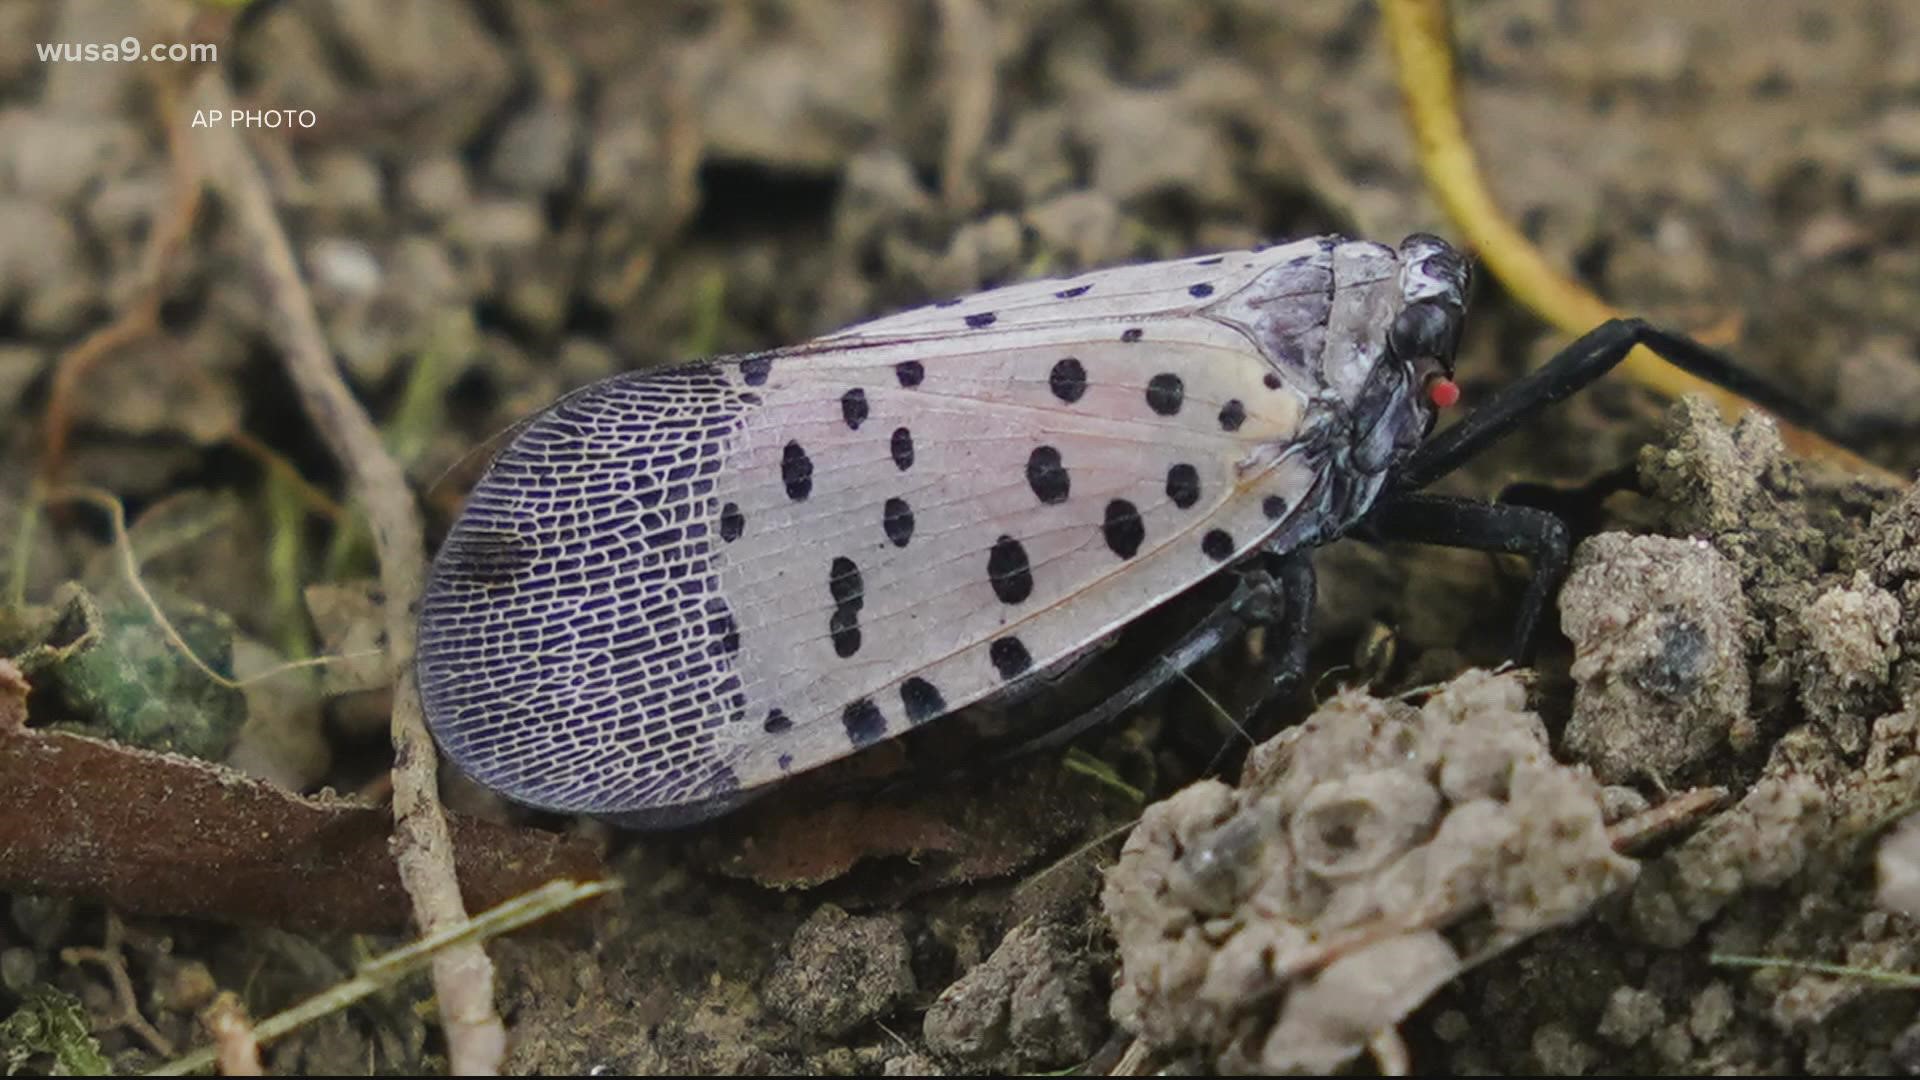 A lanternfly was recently found in a shipment of produce at a local grocery store in Annandale, Va., Fairfax County officials say.